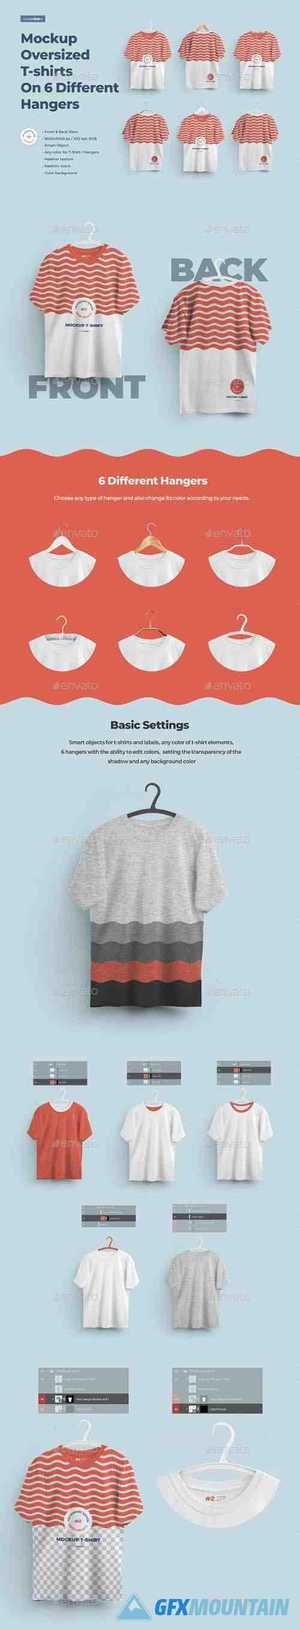 2 Mockups Oversized T-shirts On 6 Different Hangers 27568335